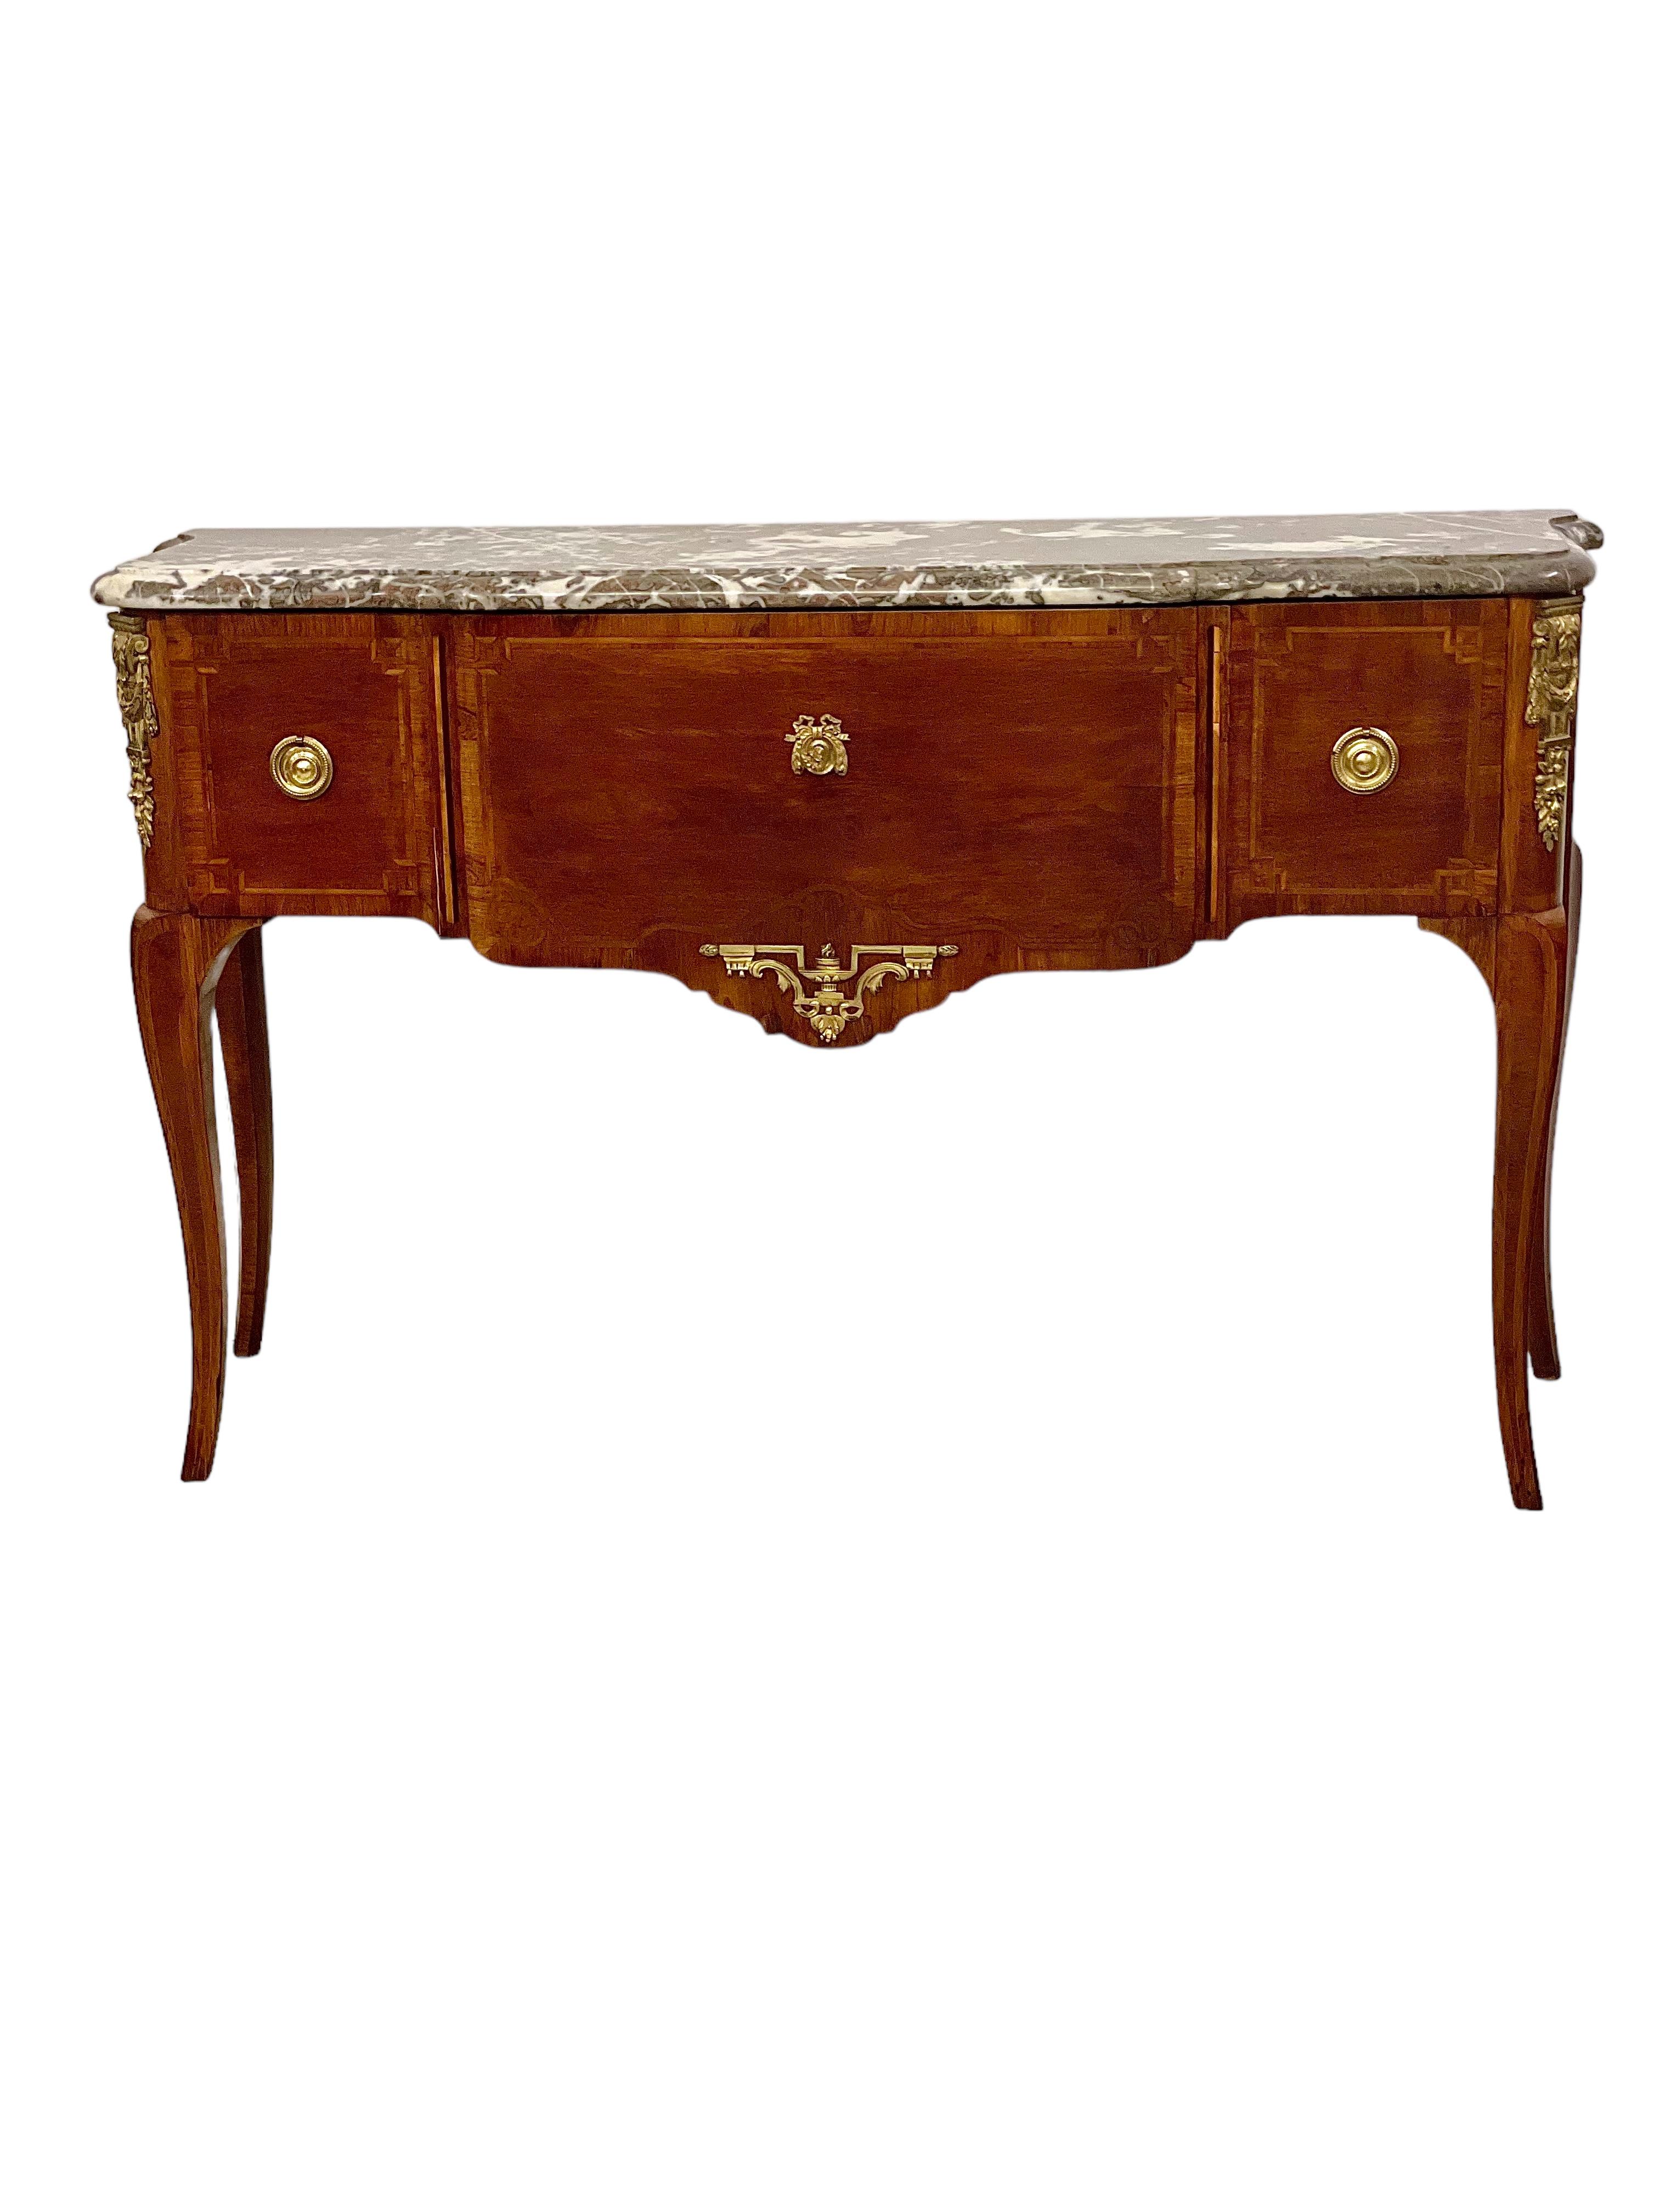 Louis XVI Period French Commode or Perruquière 18th Century For Sale 3